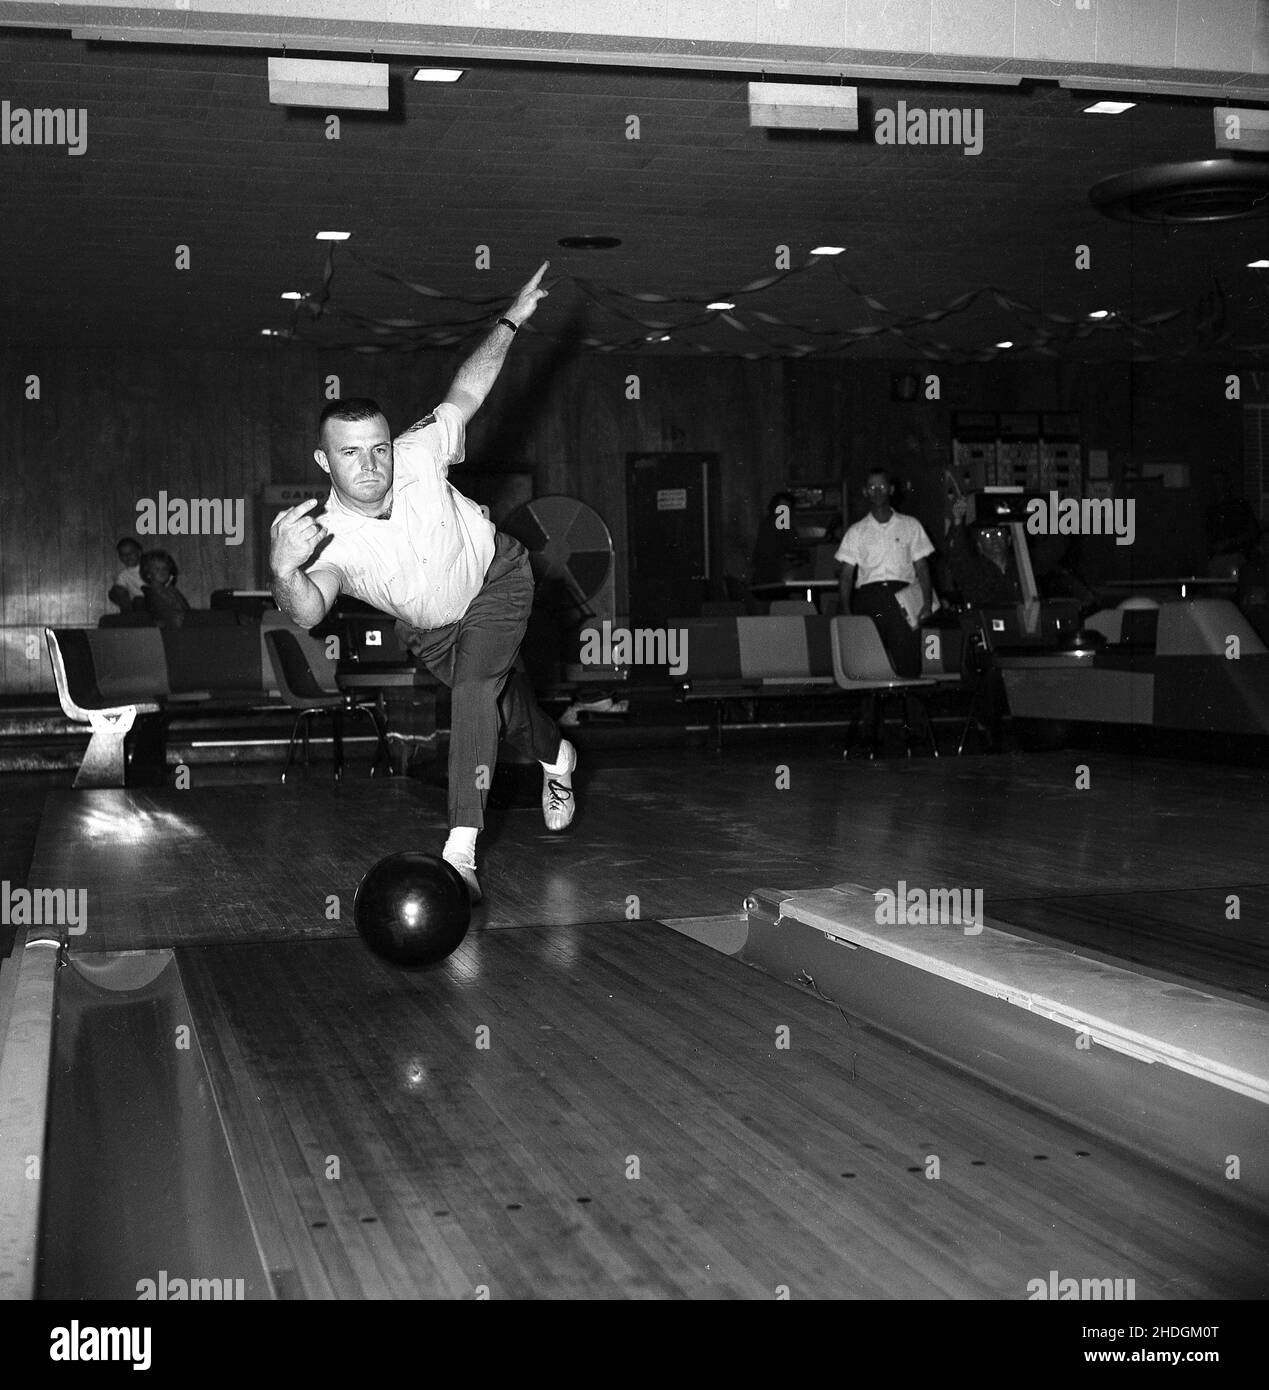 ball bowling Black and White Stock Photos Images Alamy